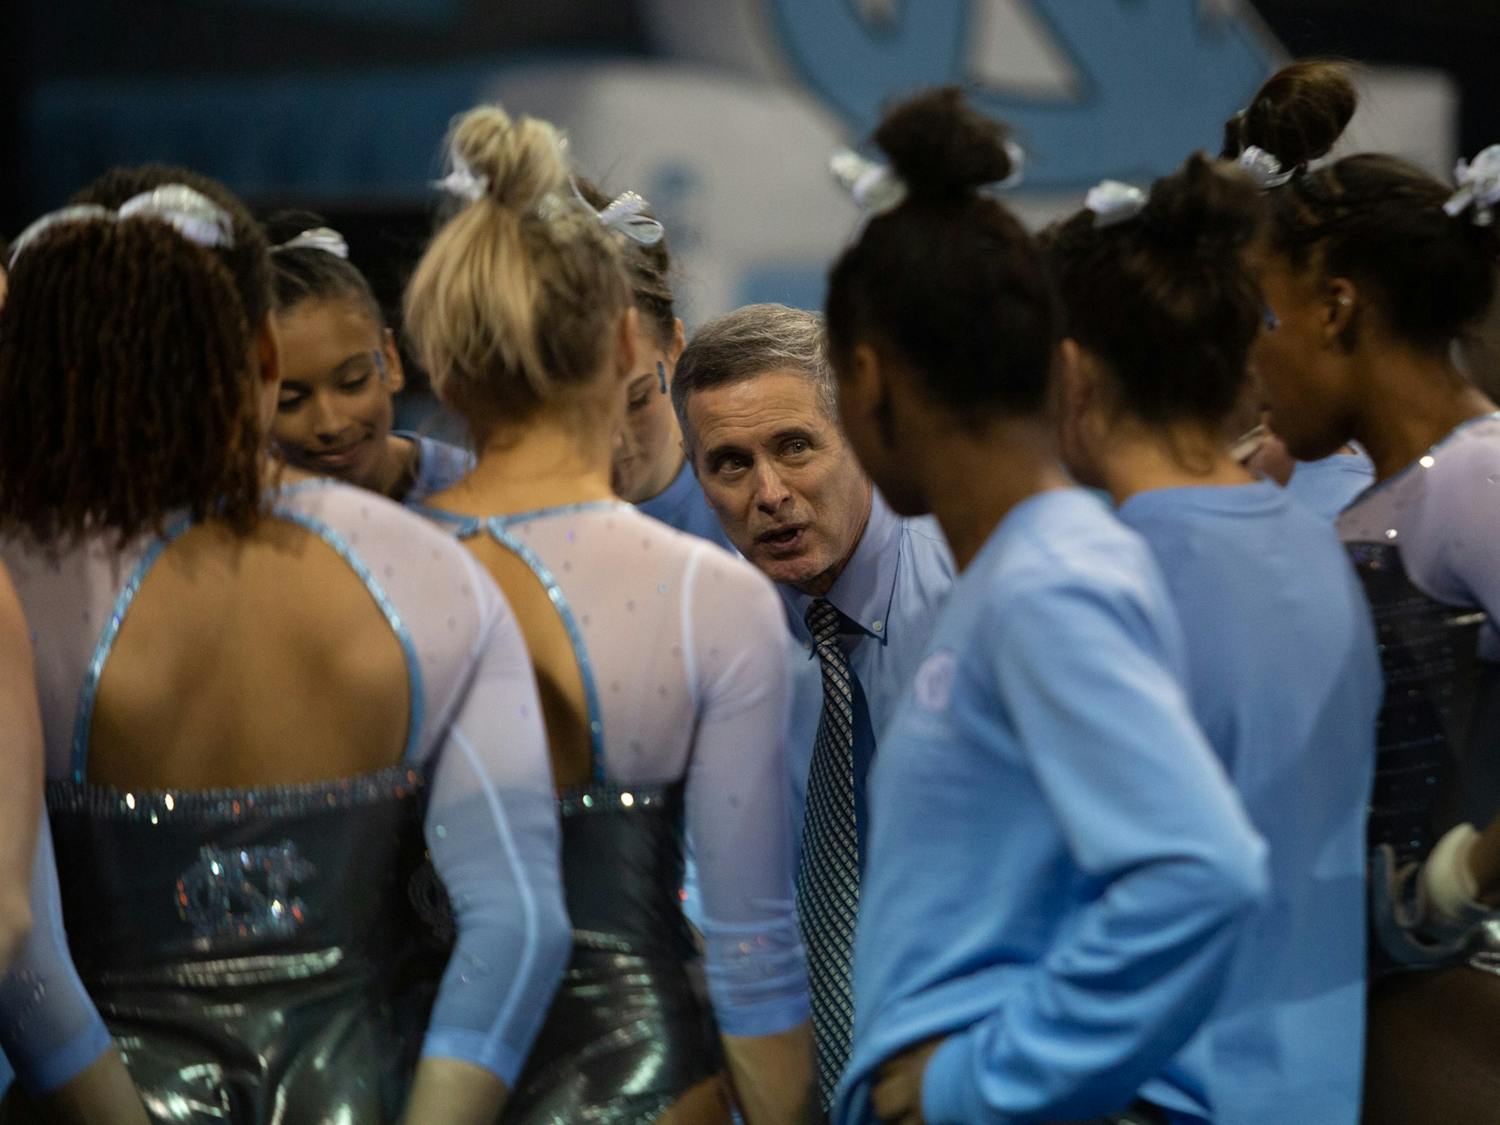 UNC Gymnastics Head Coach Derek Galvin speaks with the team after a meet against University of Pittsburgh on Saturday, Jan. 25, 2020 in Carmichael Arena.